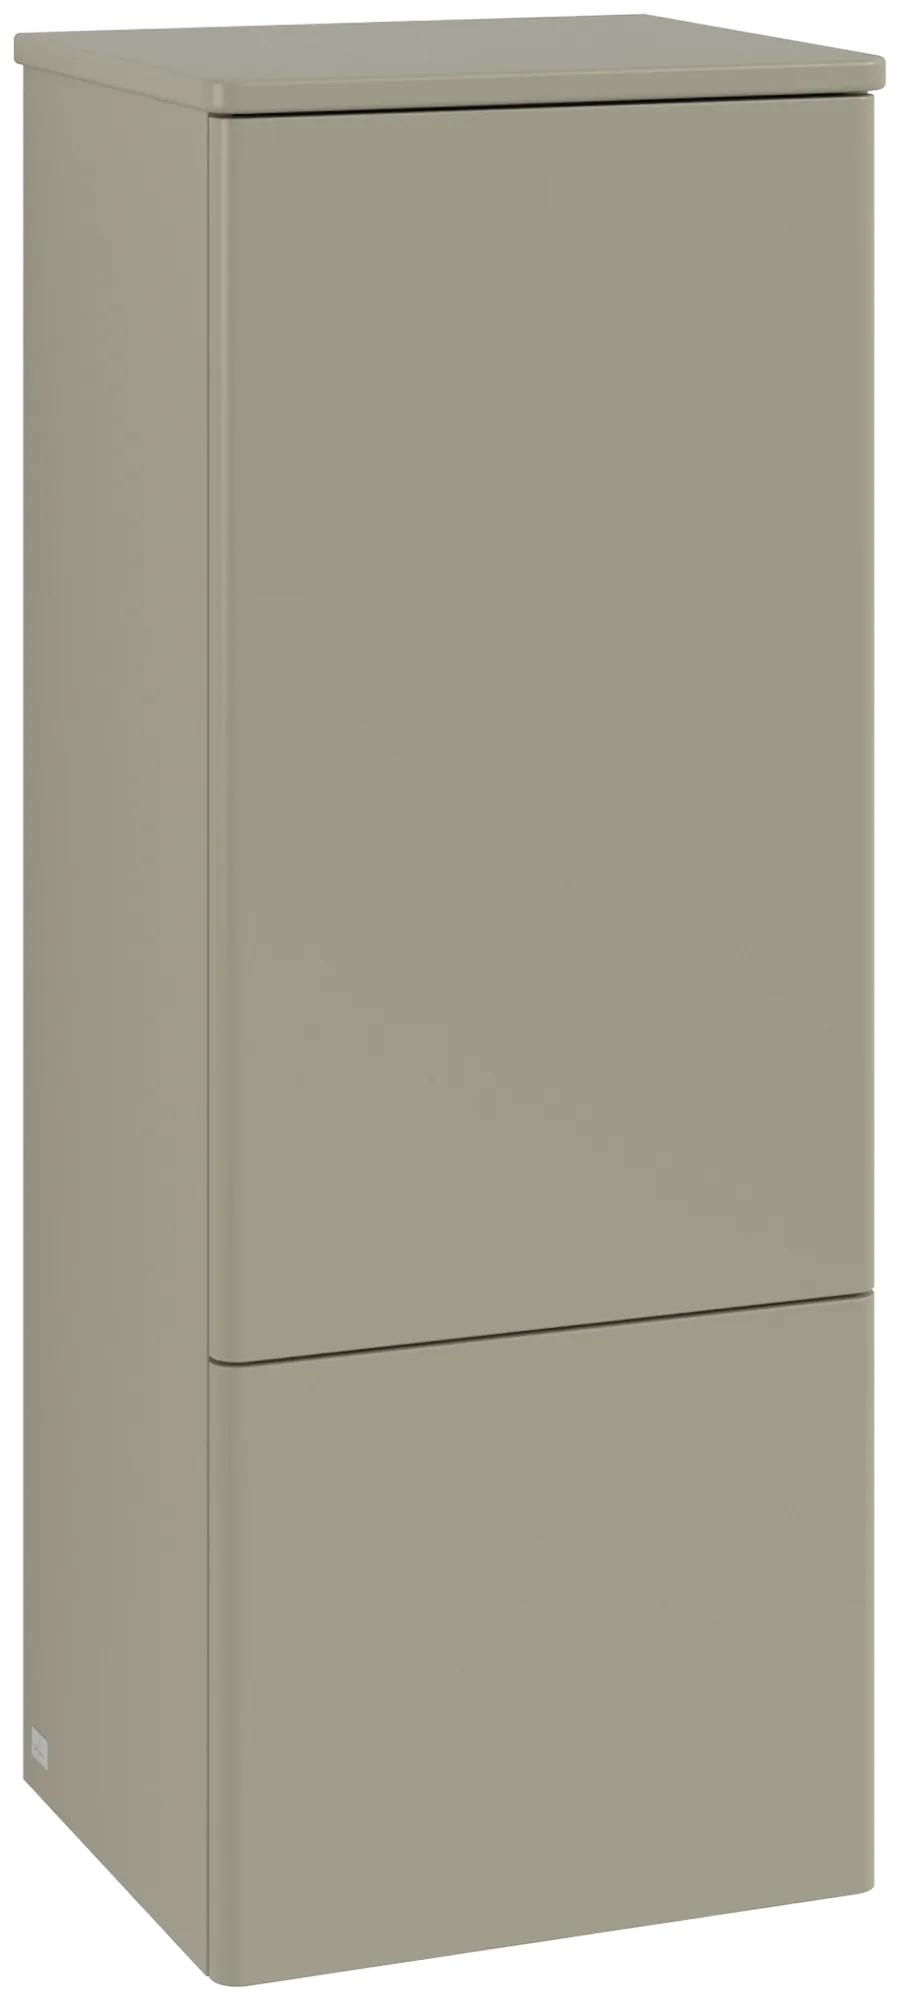 Obrázek VILLEROY BOCH Antao Medium-height cabinet, 1 door, 414 x 1039 x 356 mm, Front without structure, Stone Grey Matt Lacquer / Stone Grey Matt Lacquer #L43000HK